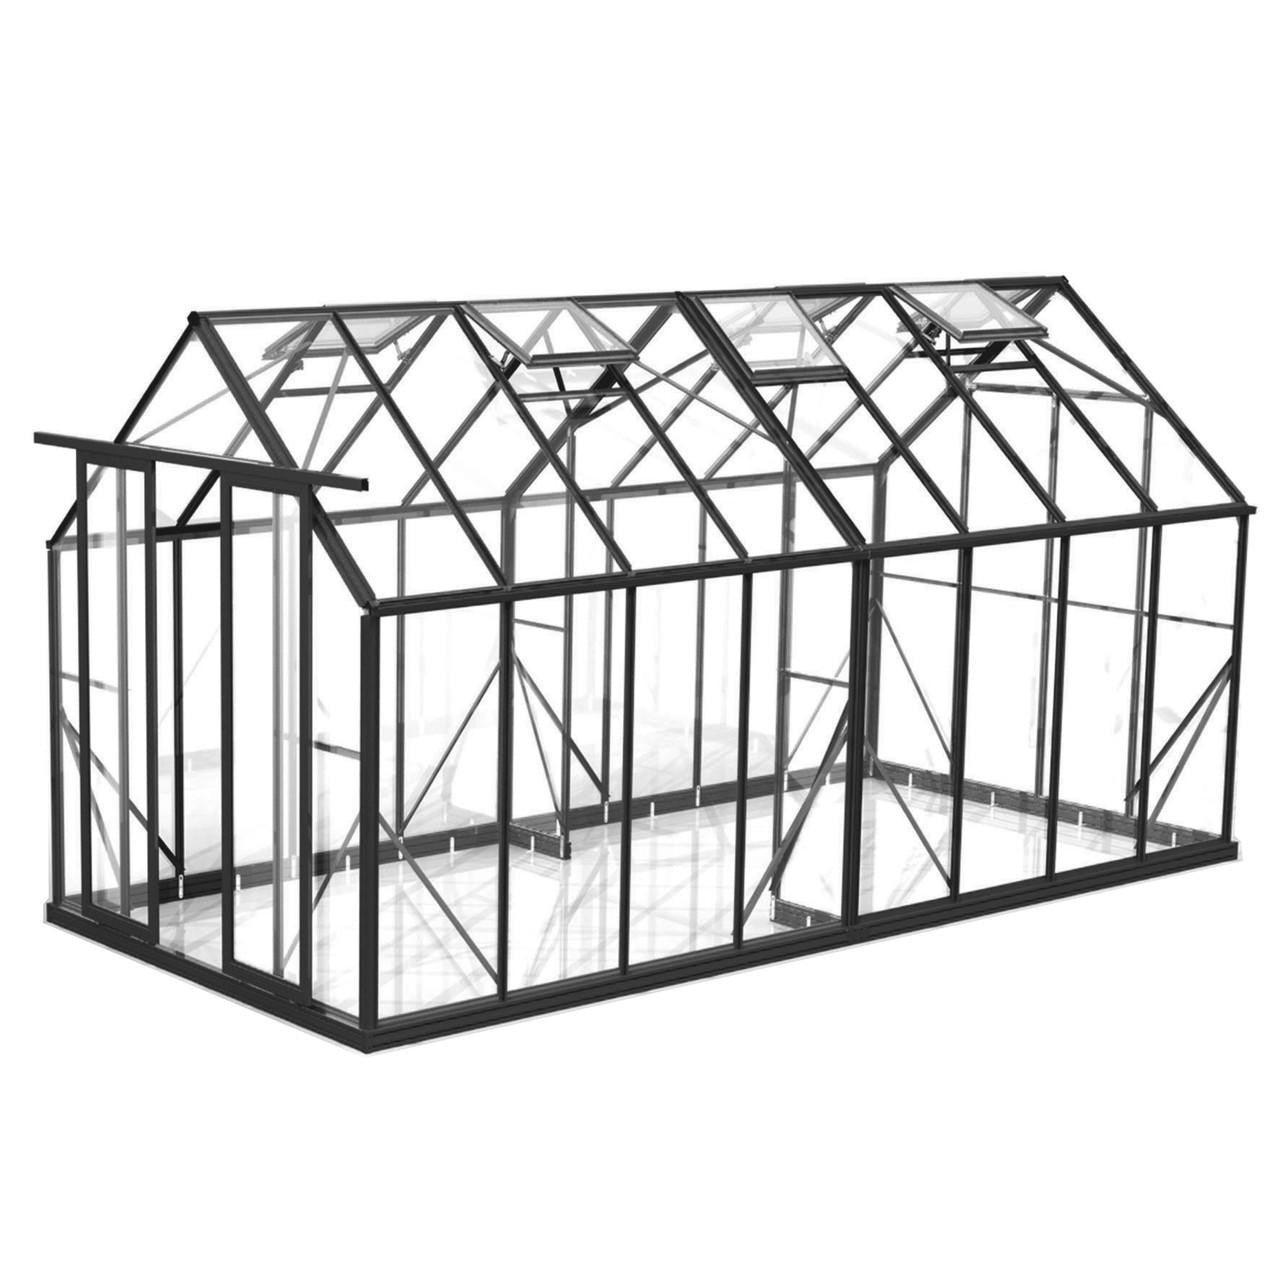 2.6m x 5.1m Glasshouse 4mm Toughened Glass with Black Frame